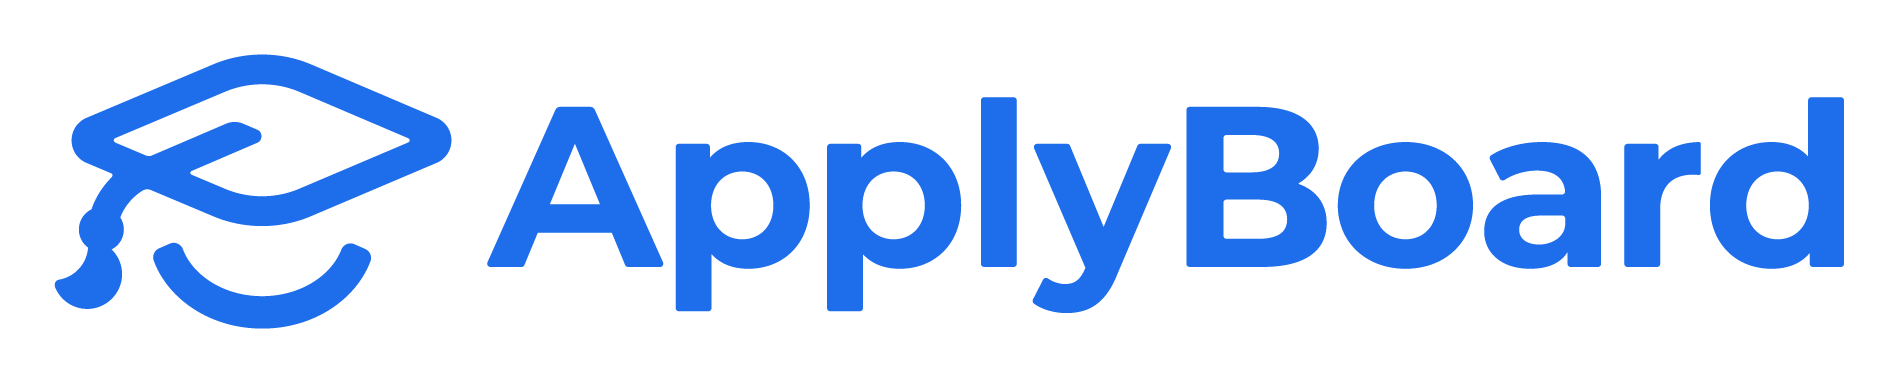 ApplyBoard Launches 